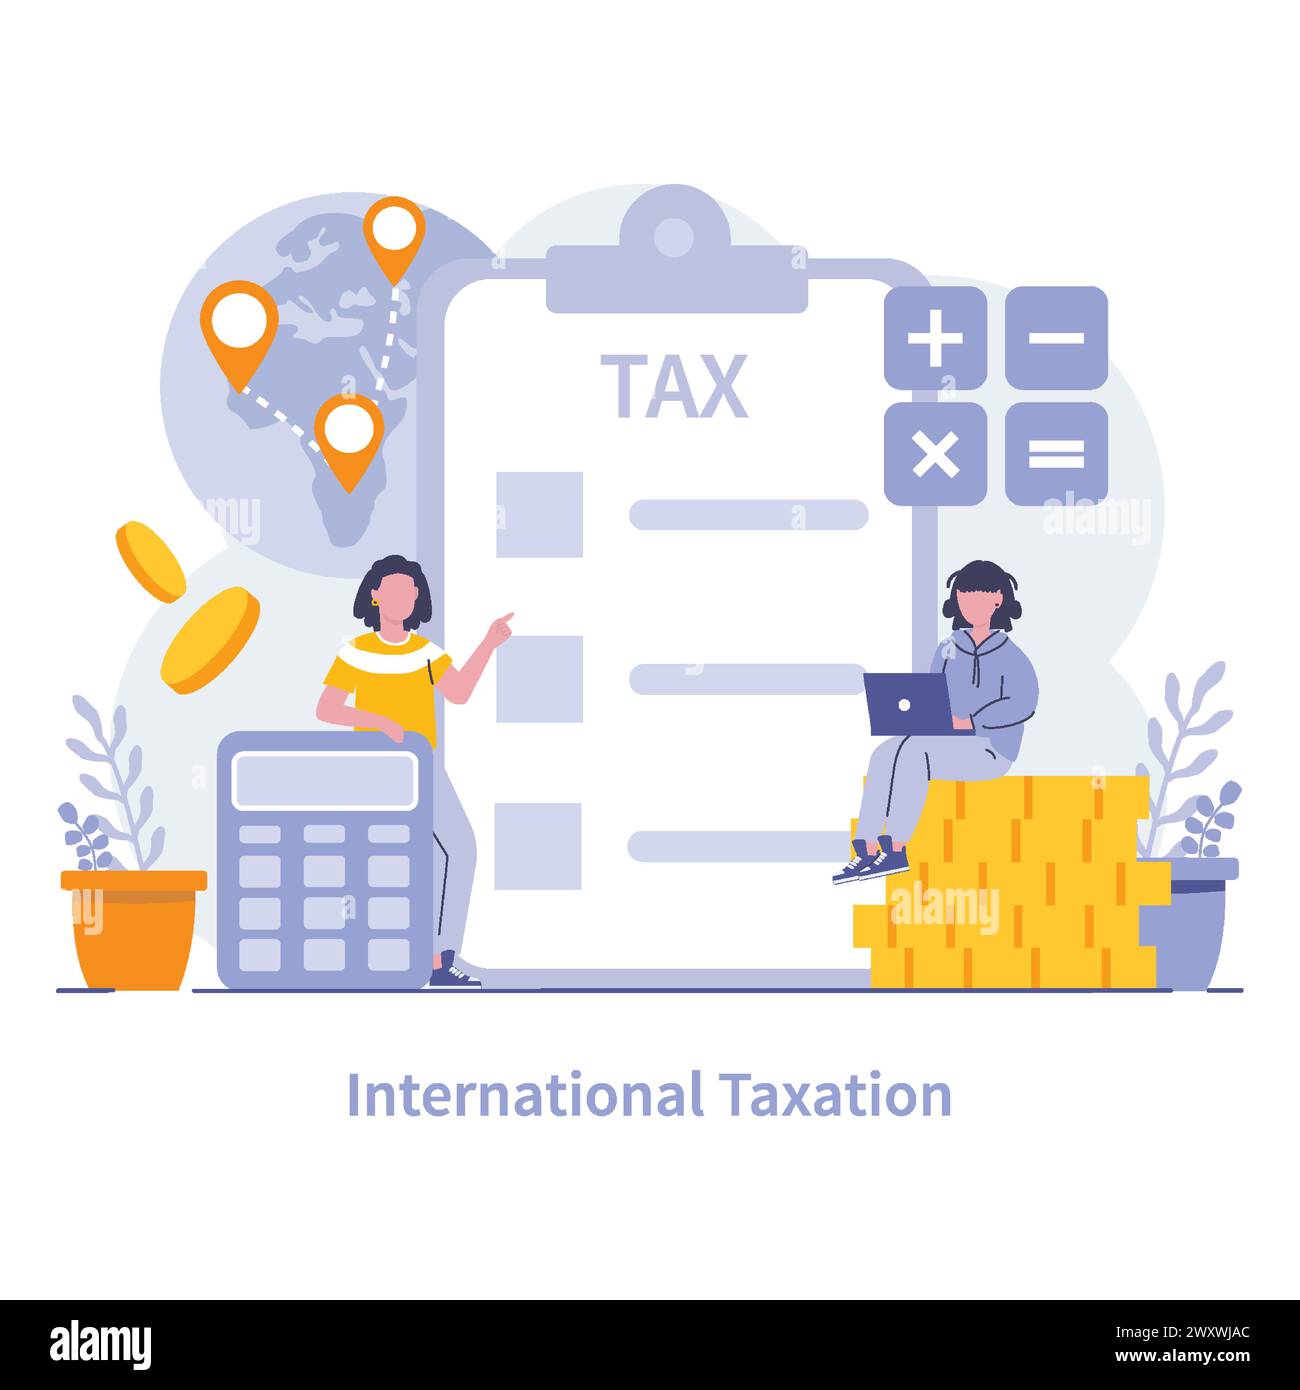 International Taxation concept. Experts navigate global fiscal policies, optimizing tax strategies for multinational operations. Financial stewardship across borders. Vector illustration. Stock Vector